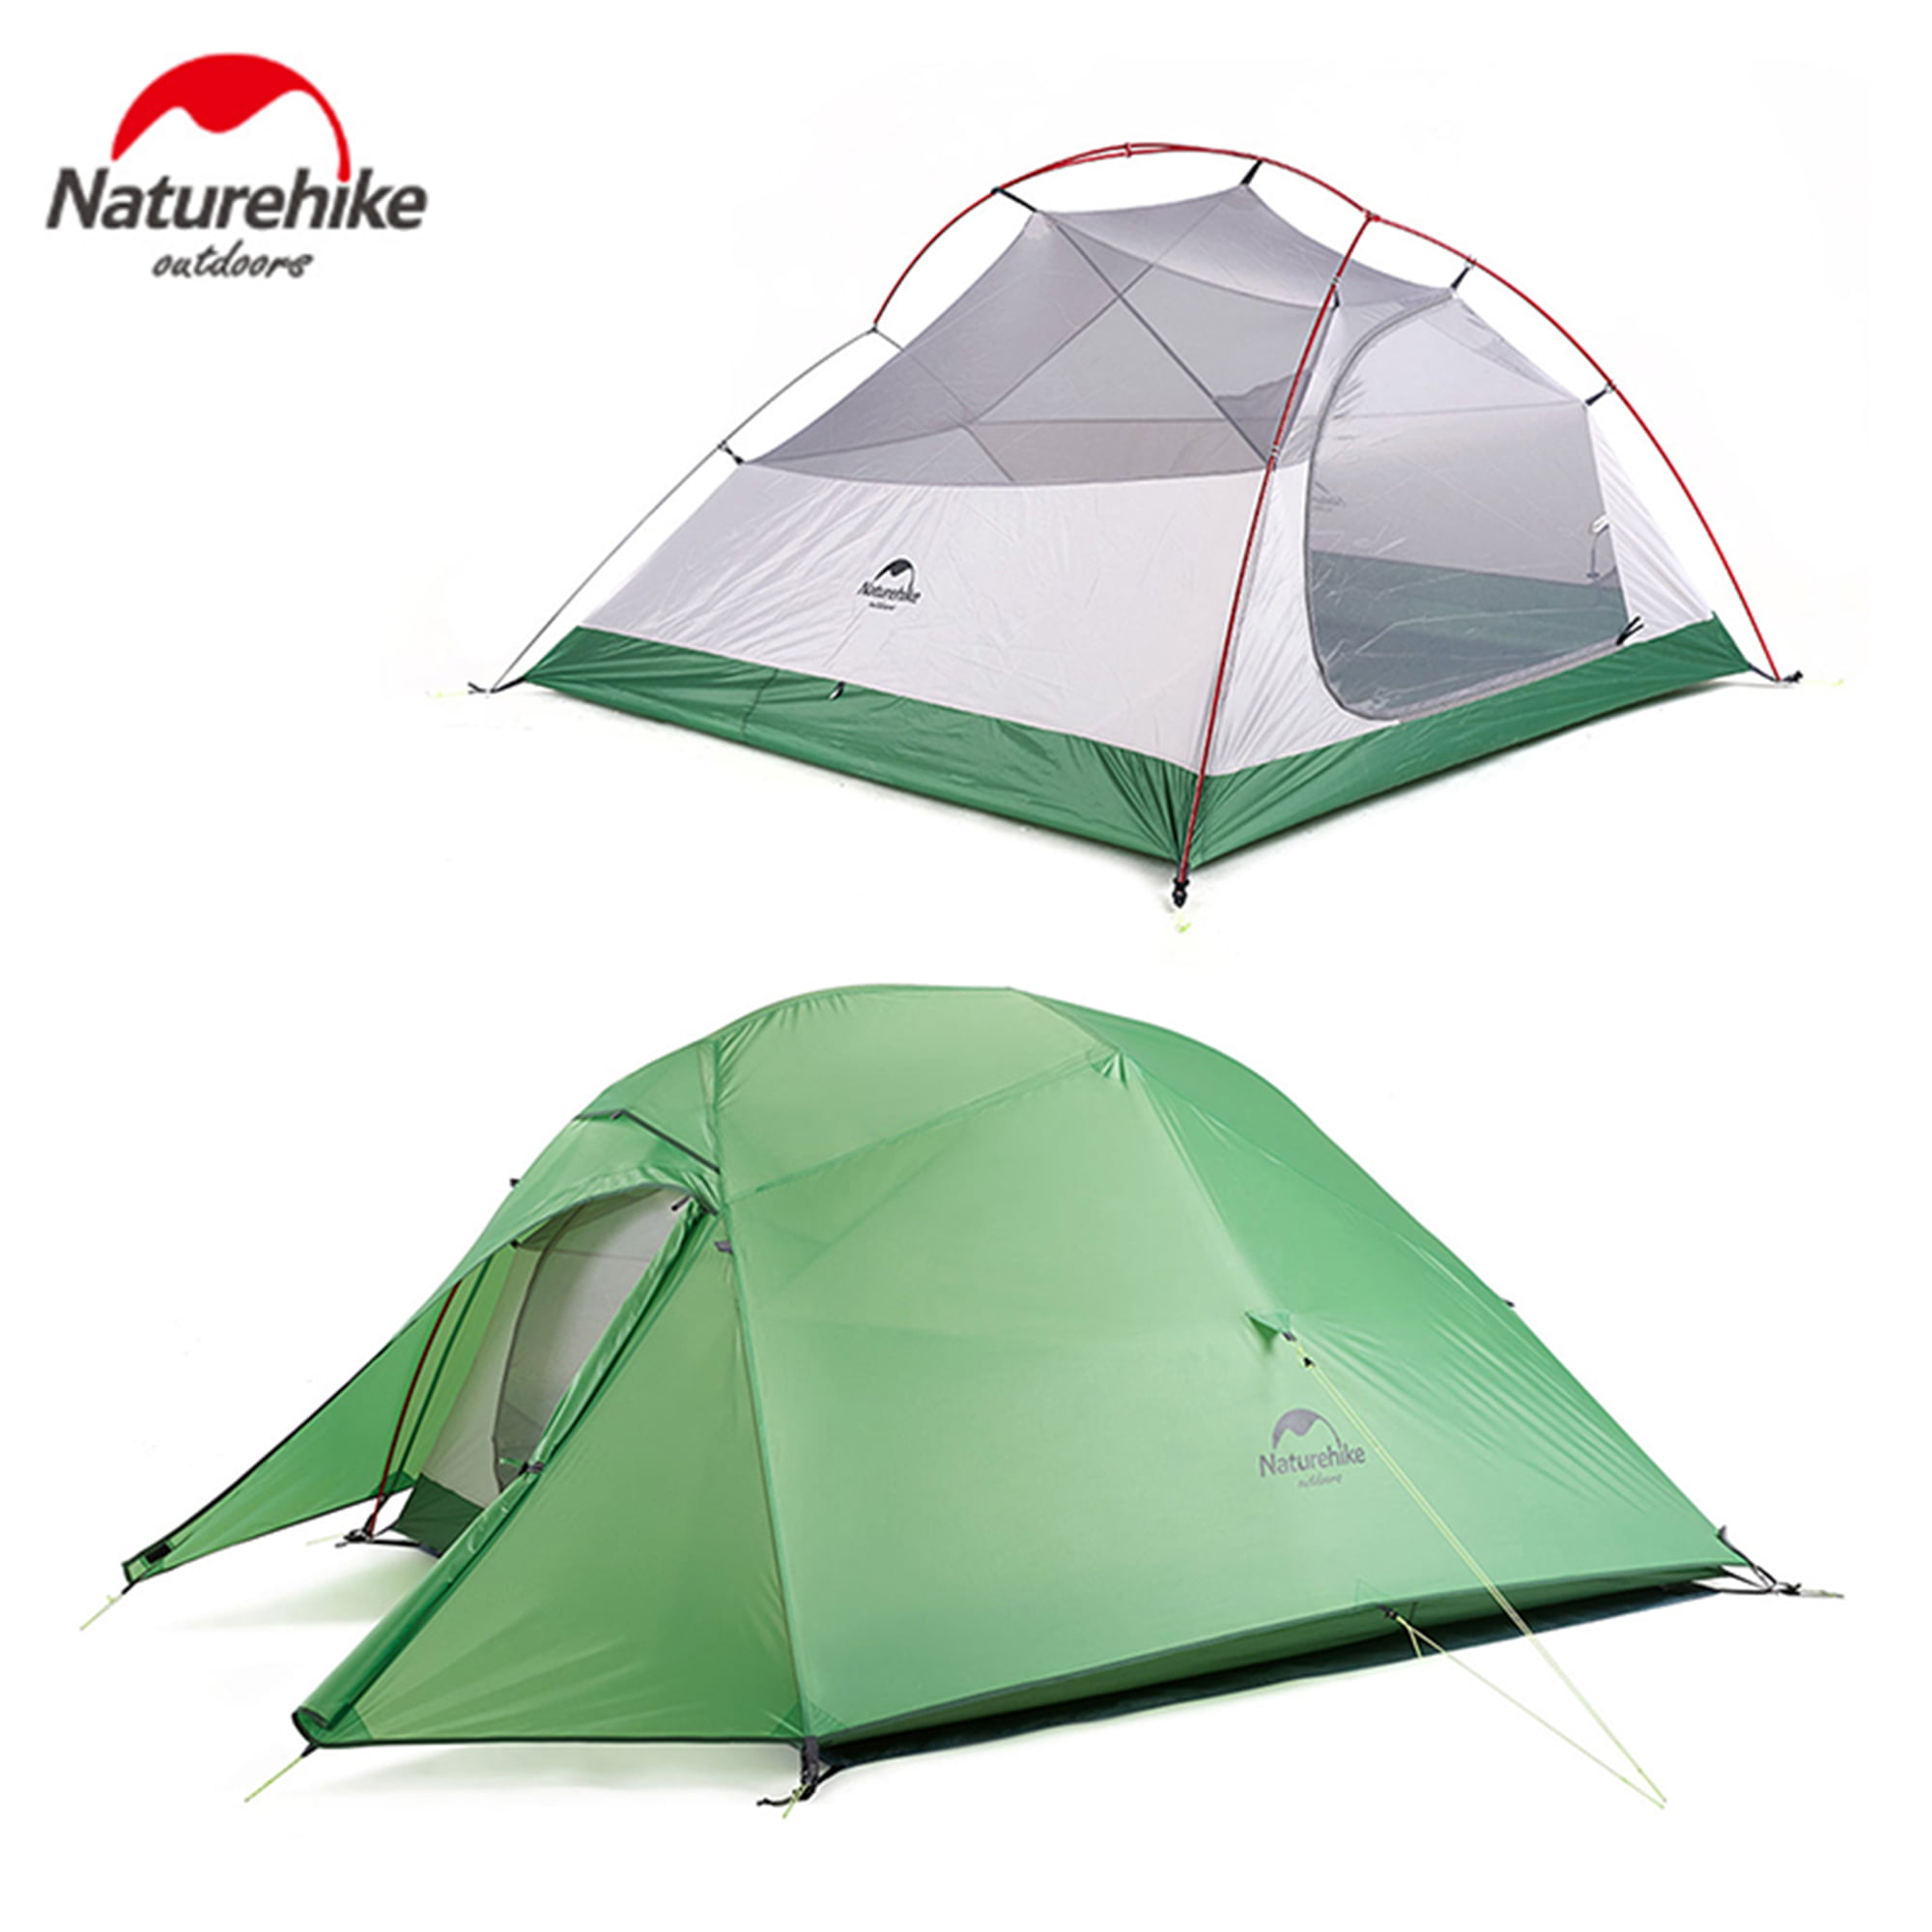 Outdoor 2 Person 4 Season Camping Hiking Waterproof Ultralight Backpacking Tent